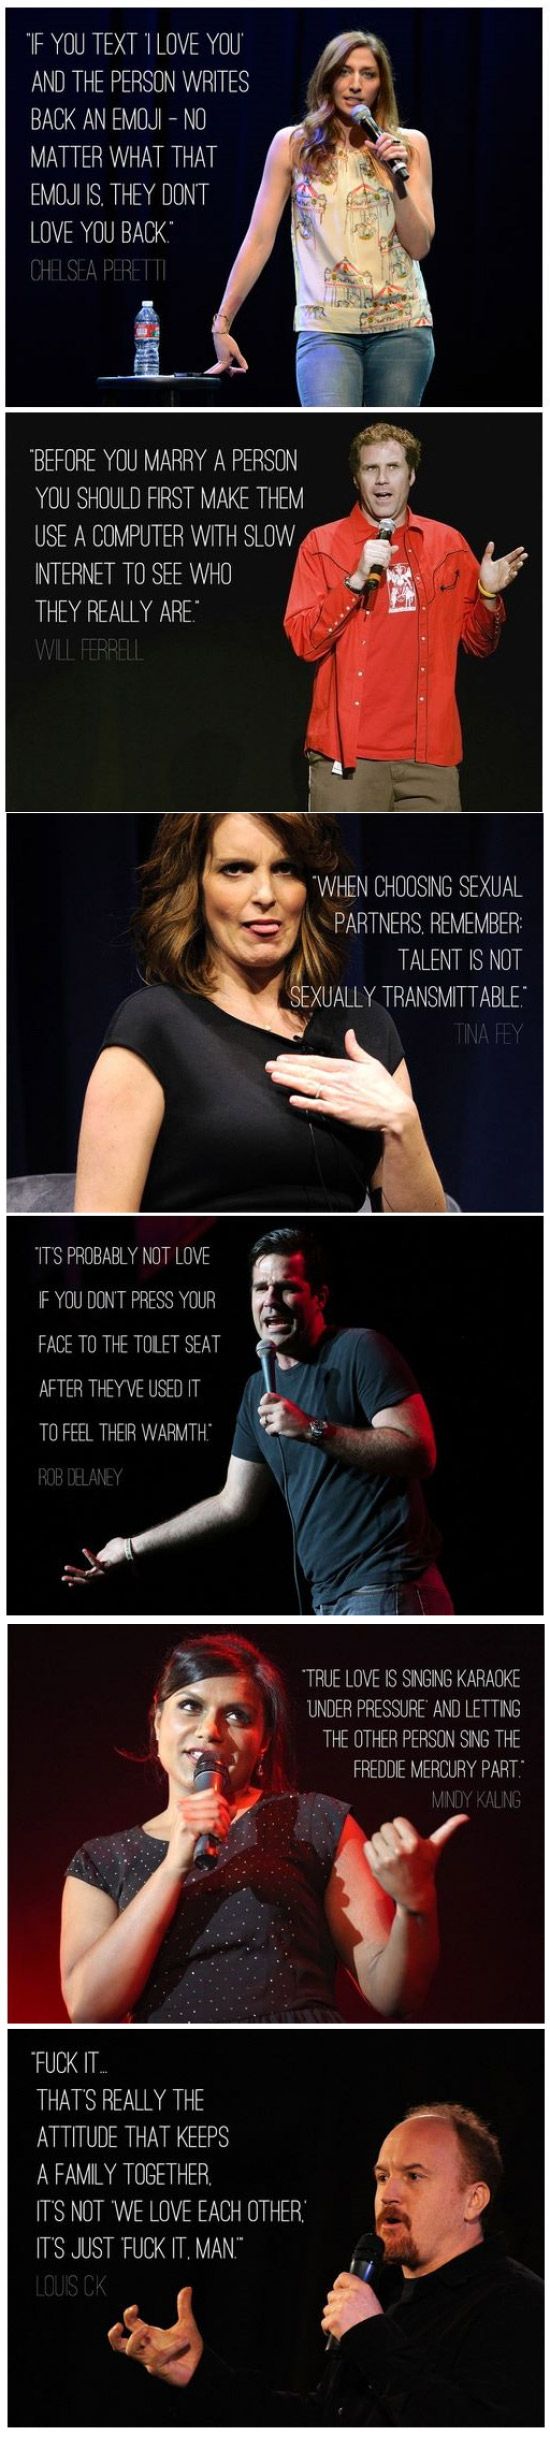 Famous comedians on relationships